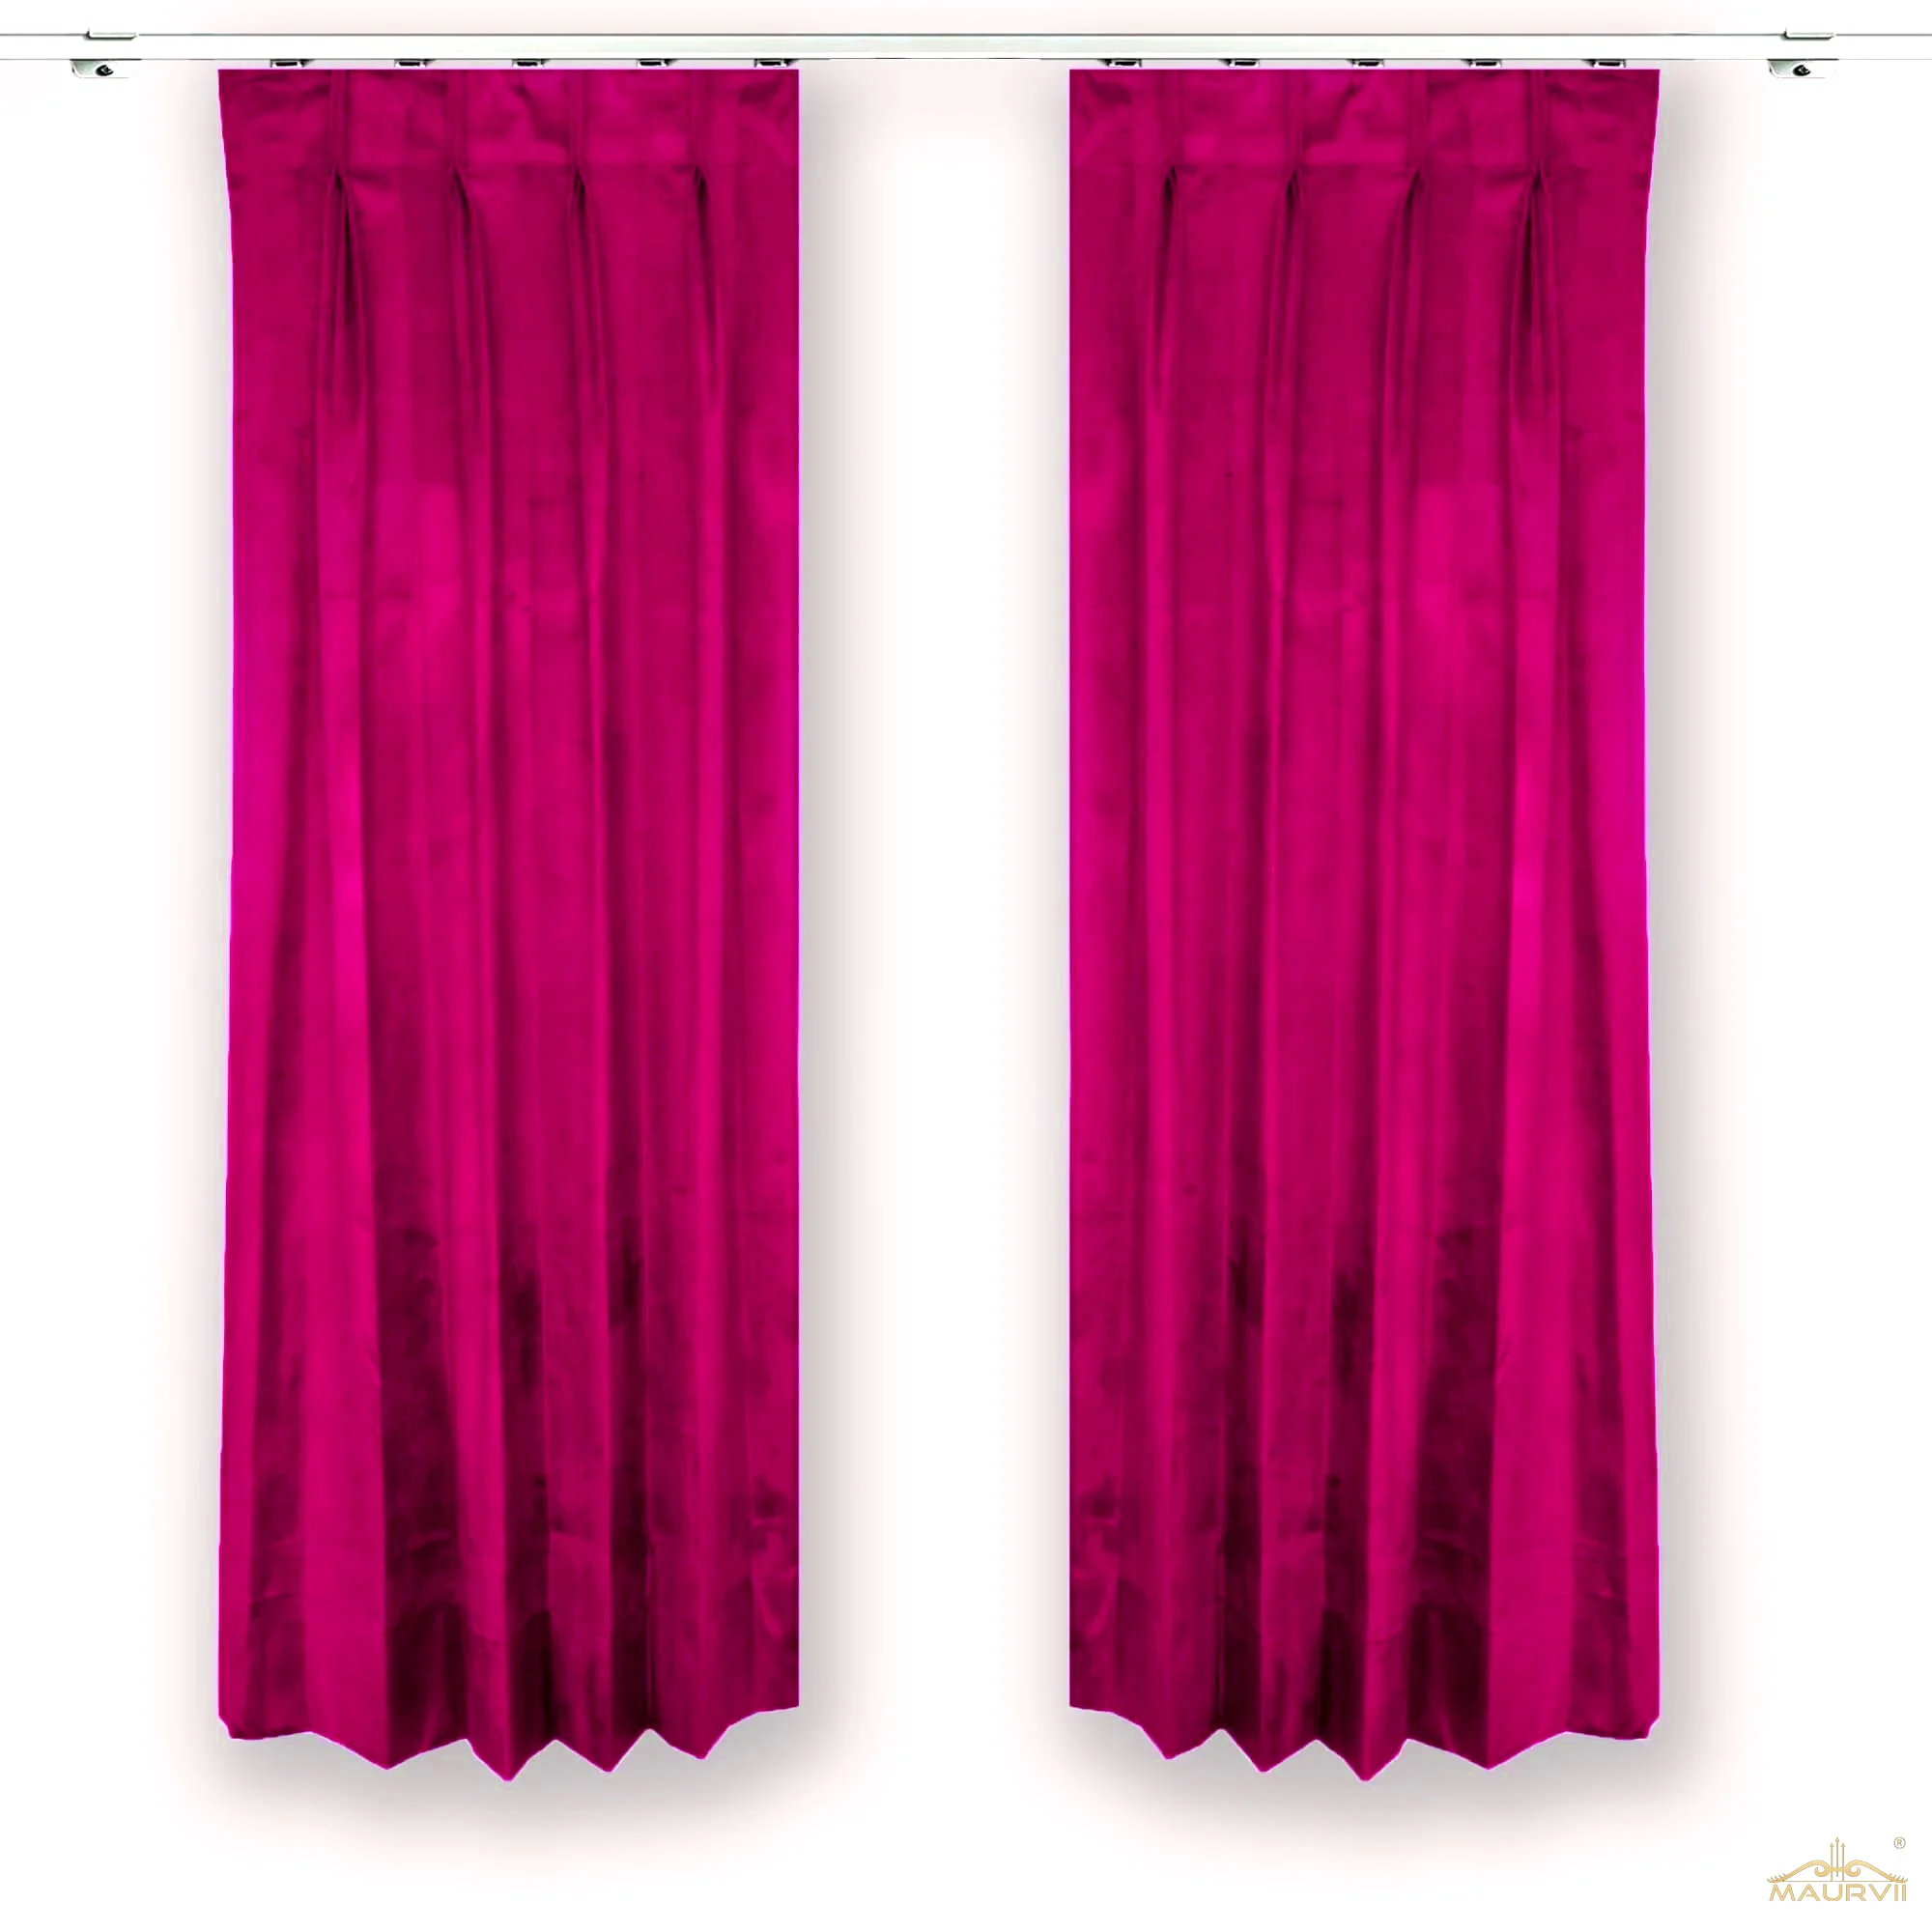 Violet red room curtains